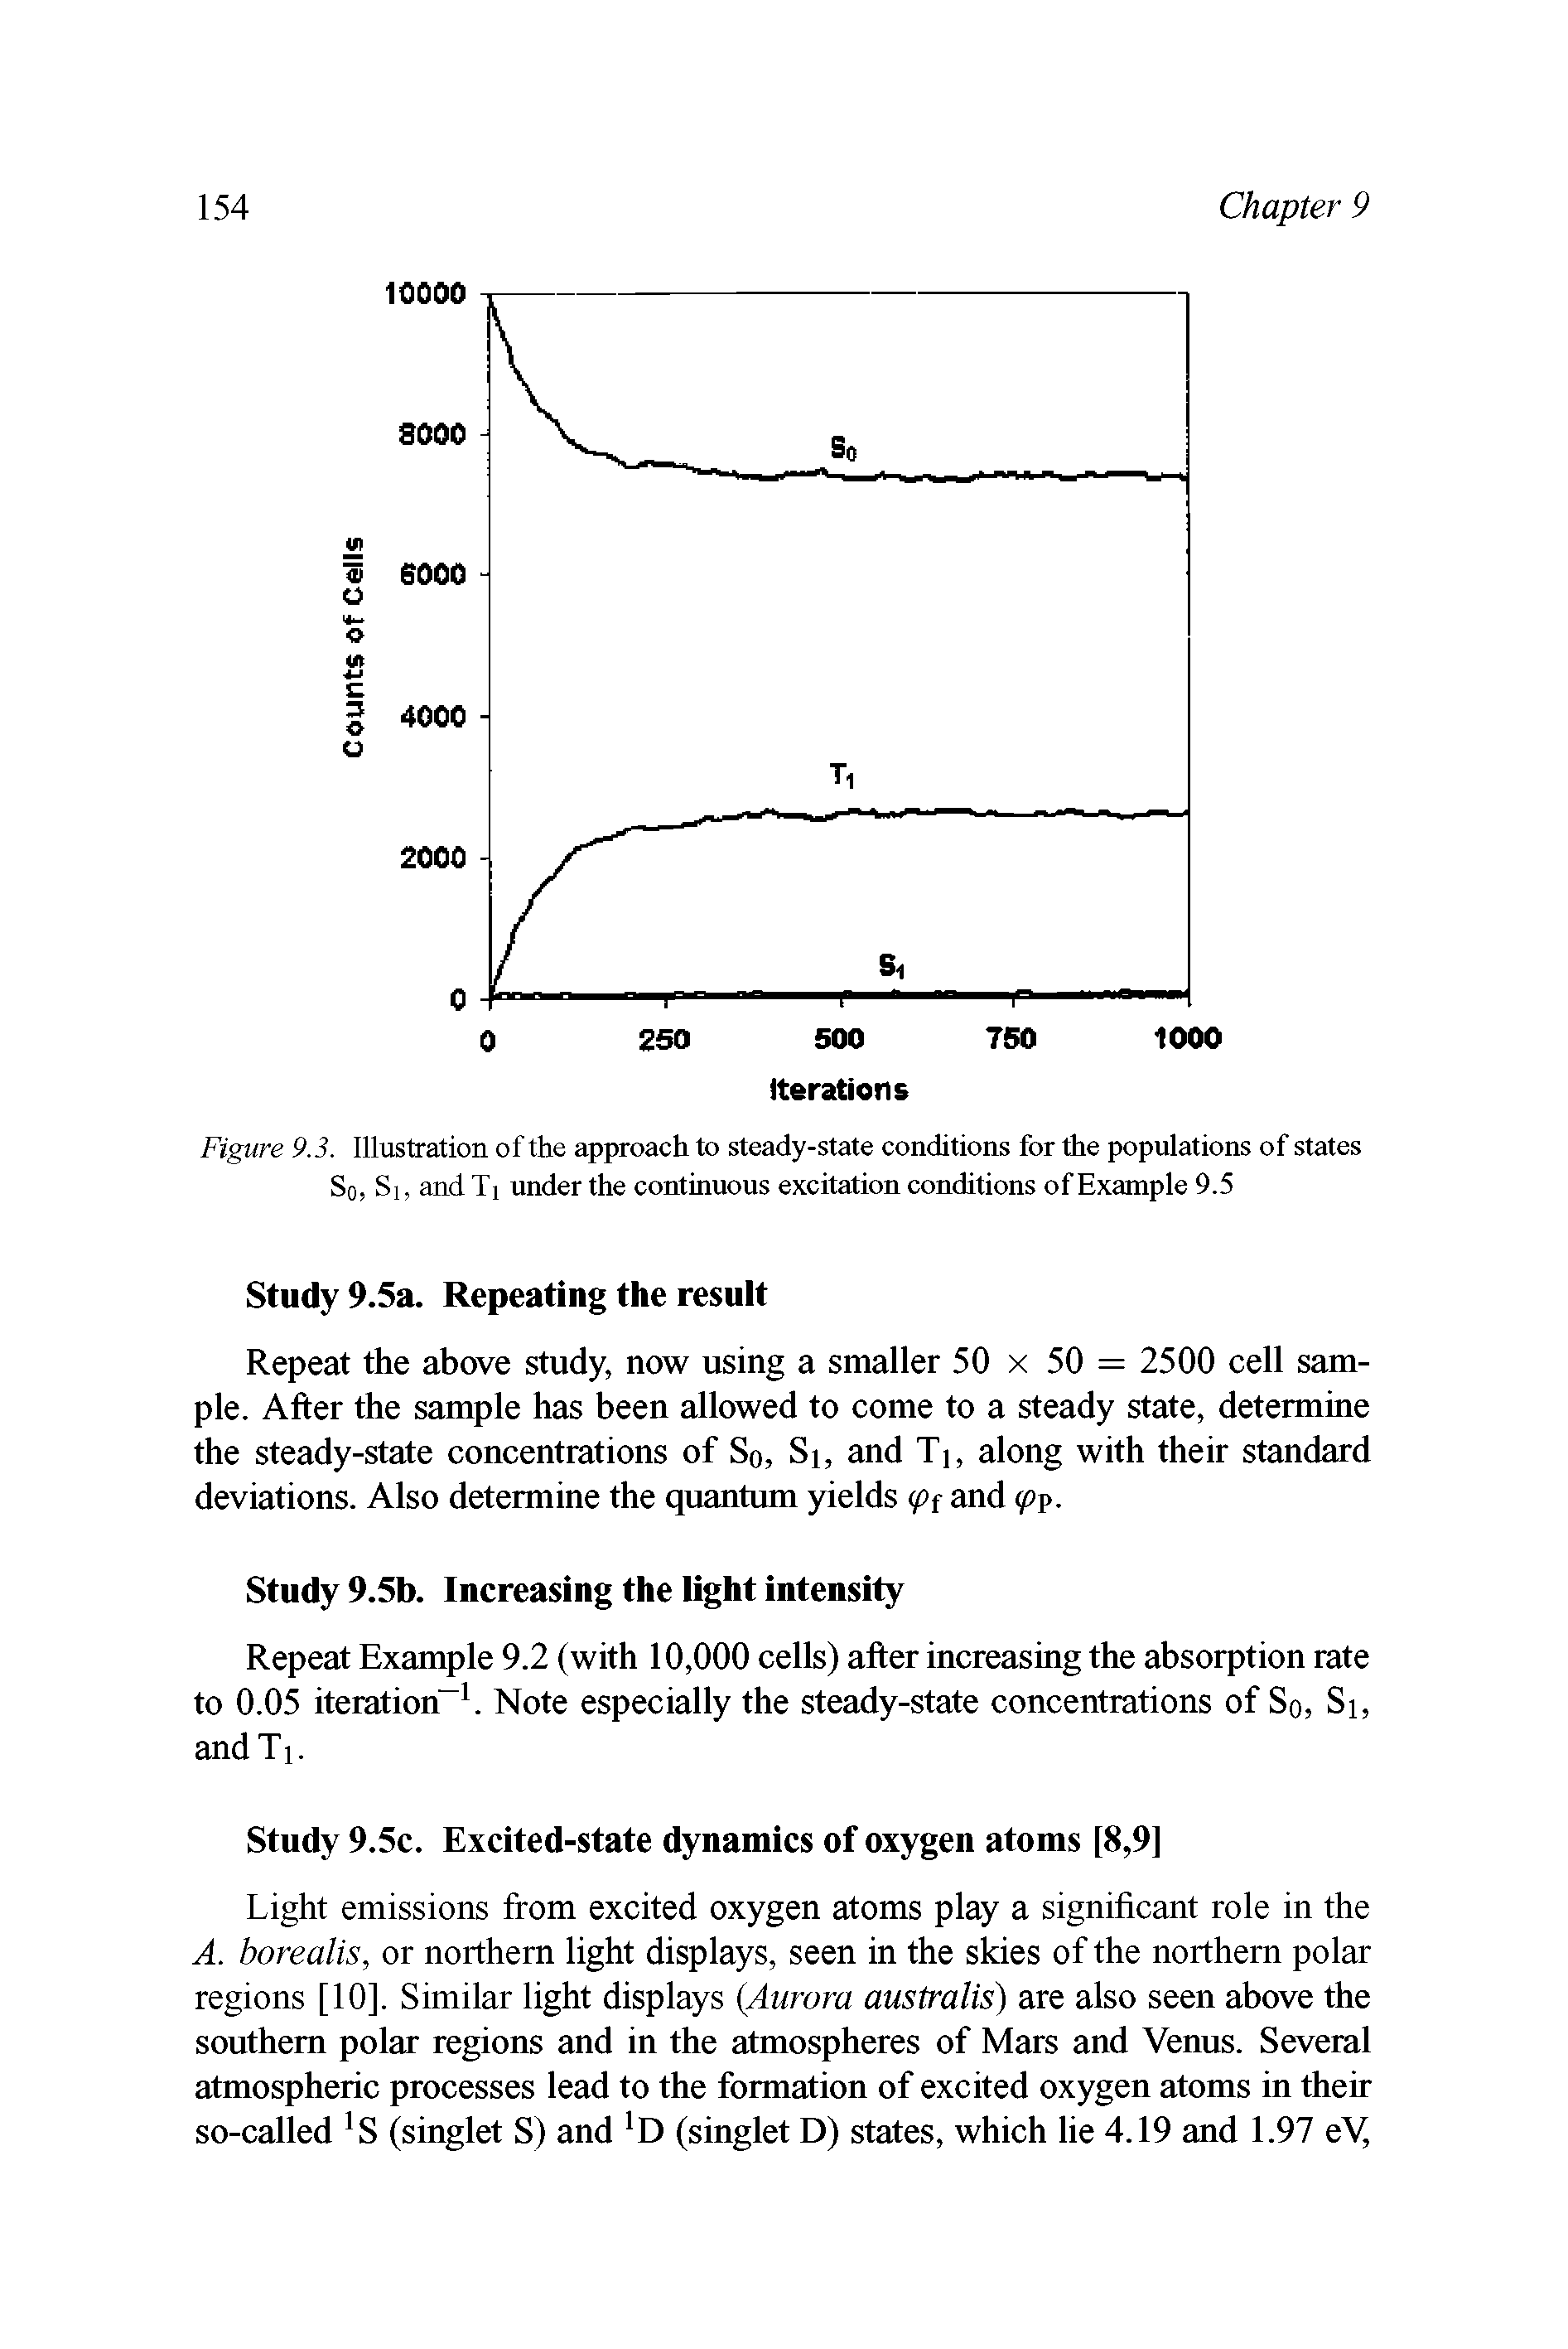 Figure 9.3. Illustration of the approach to steady-state conditions for the populations of states So, Si, and Ti under the continuous excitation conditions of Example 9.5...